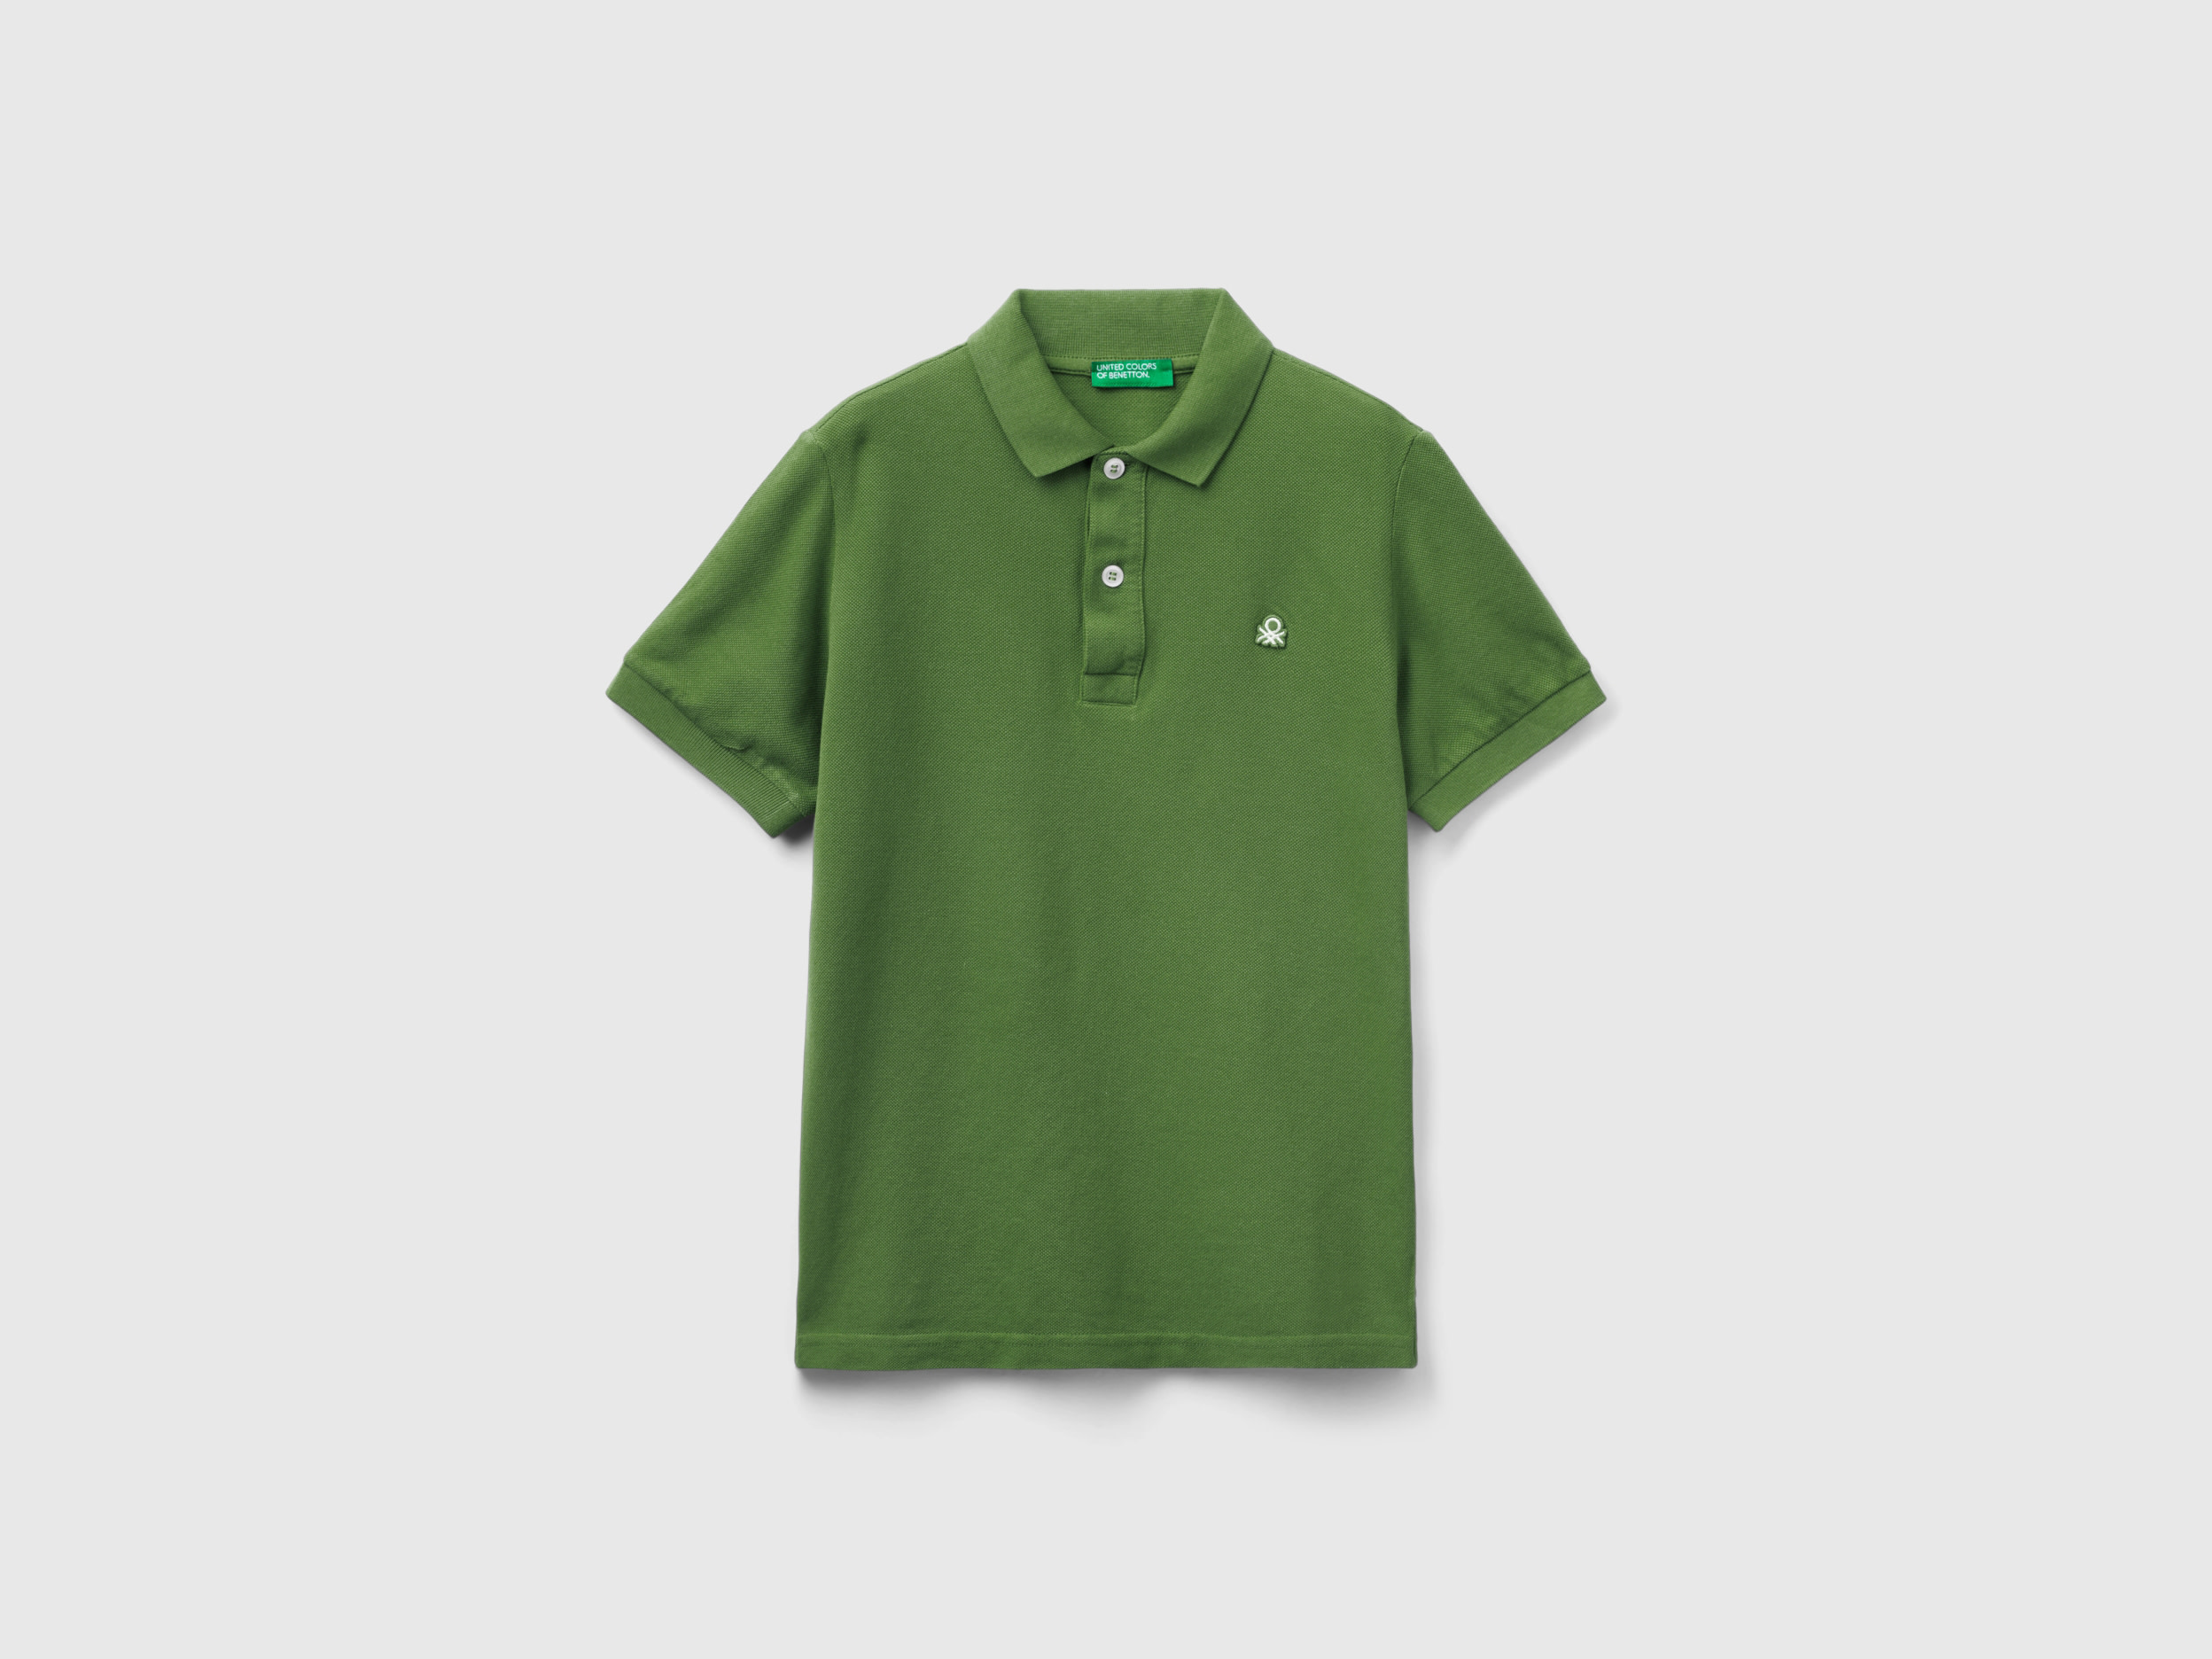 Image of Benetton, Slim Fit Polo In 100% Organic Cotton, size XL, Green, Kids